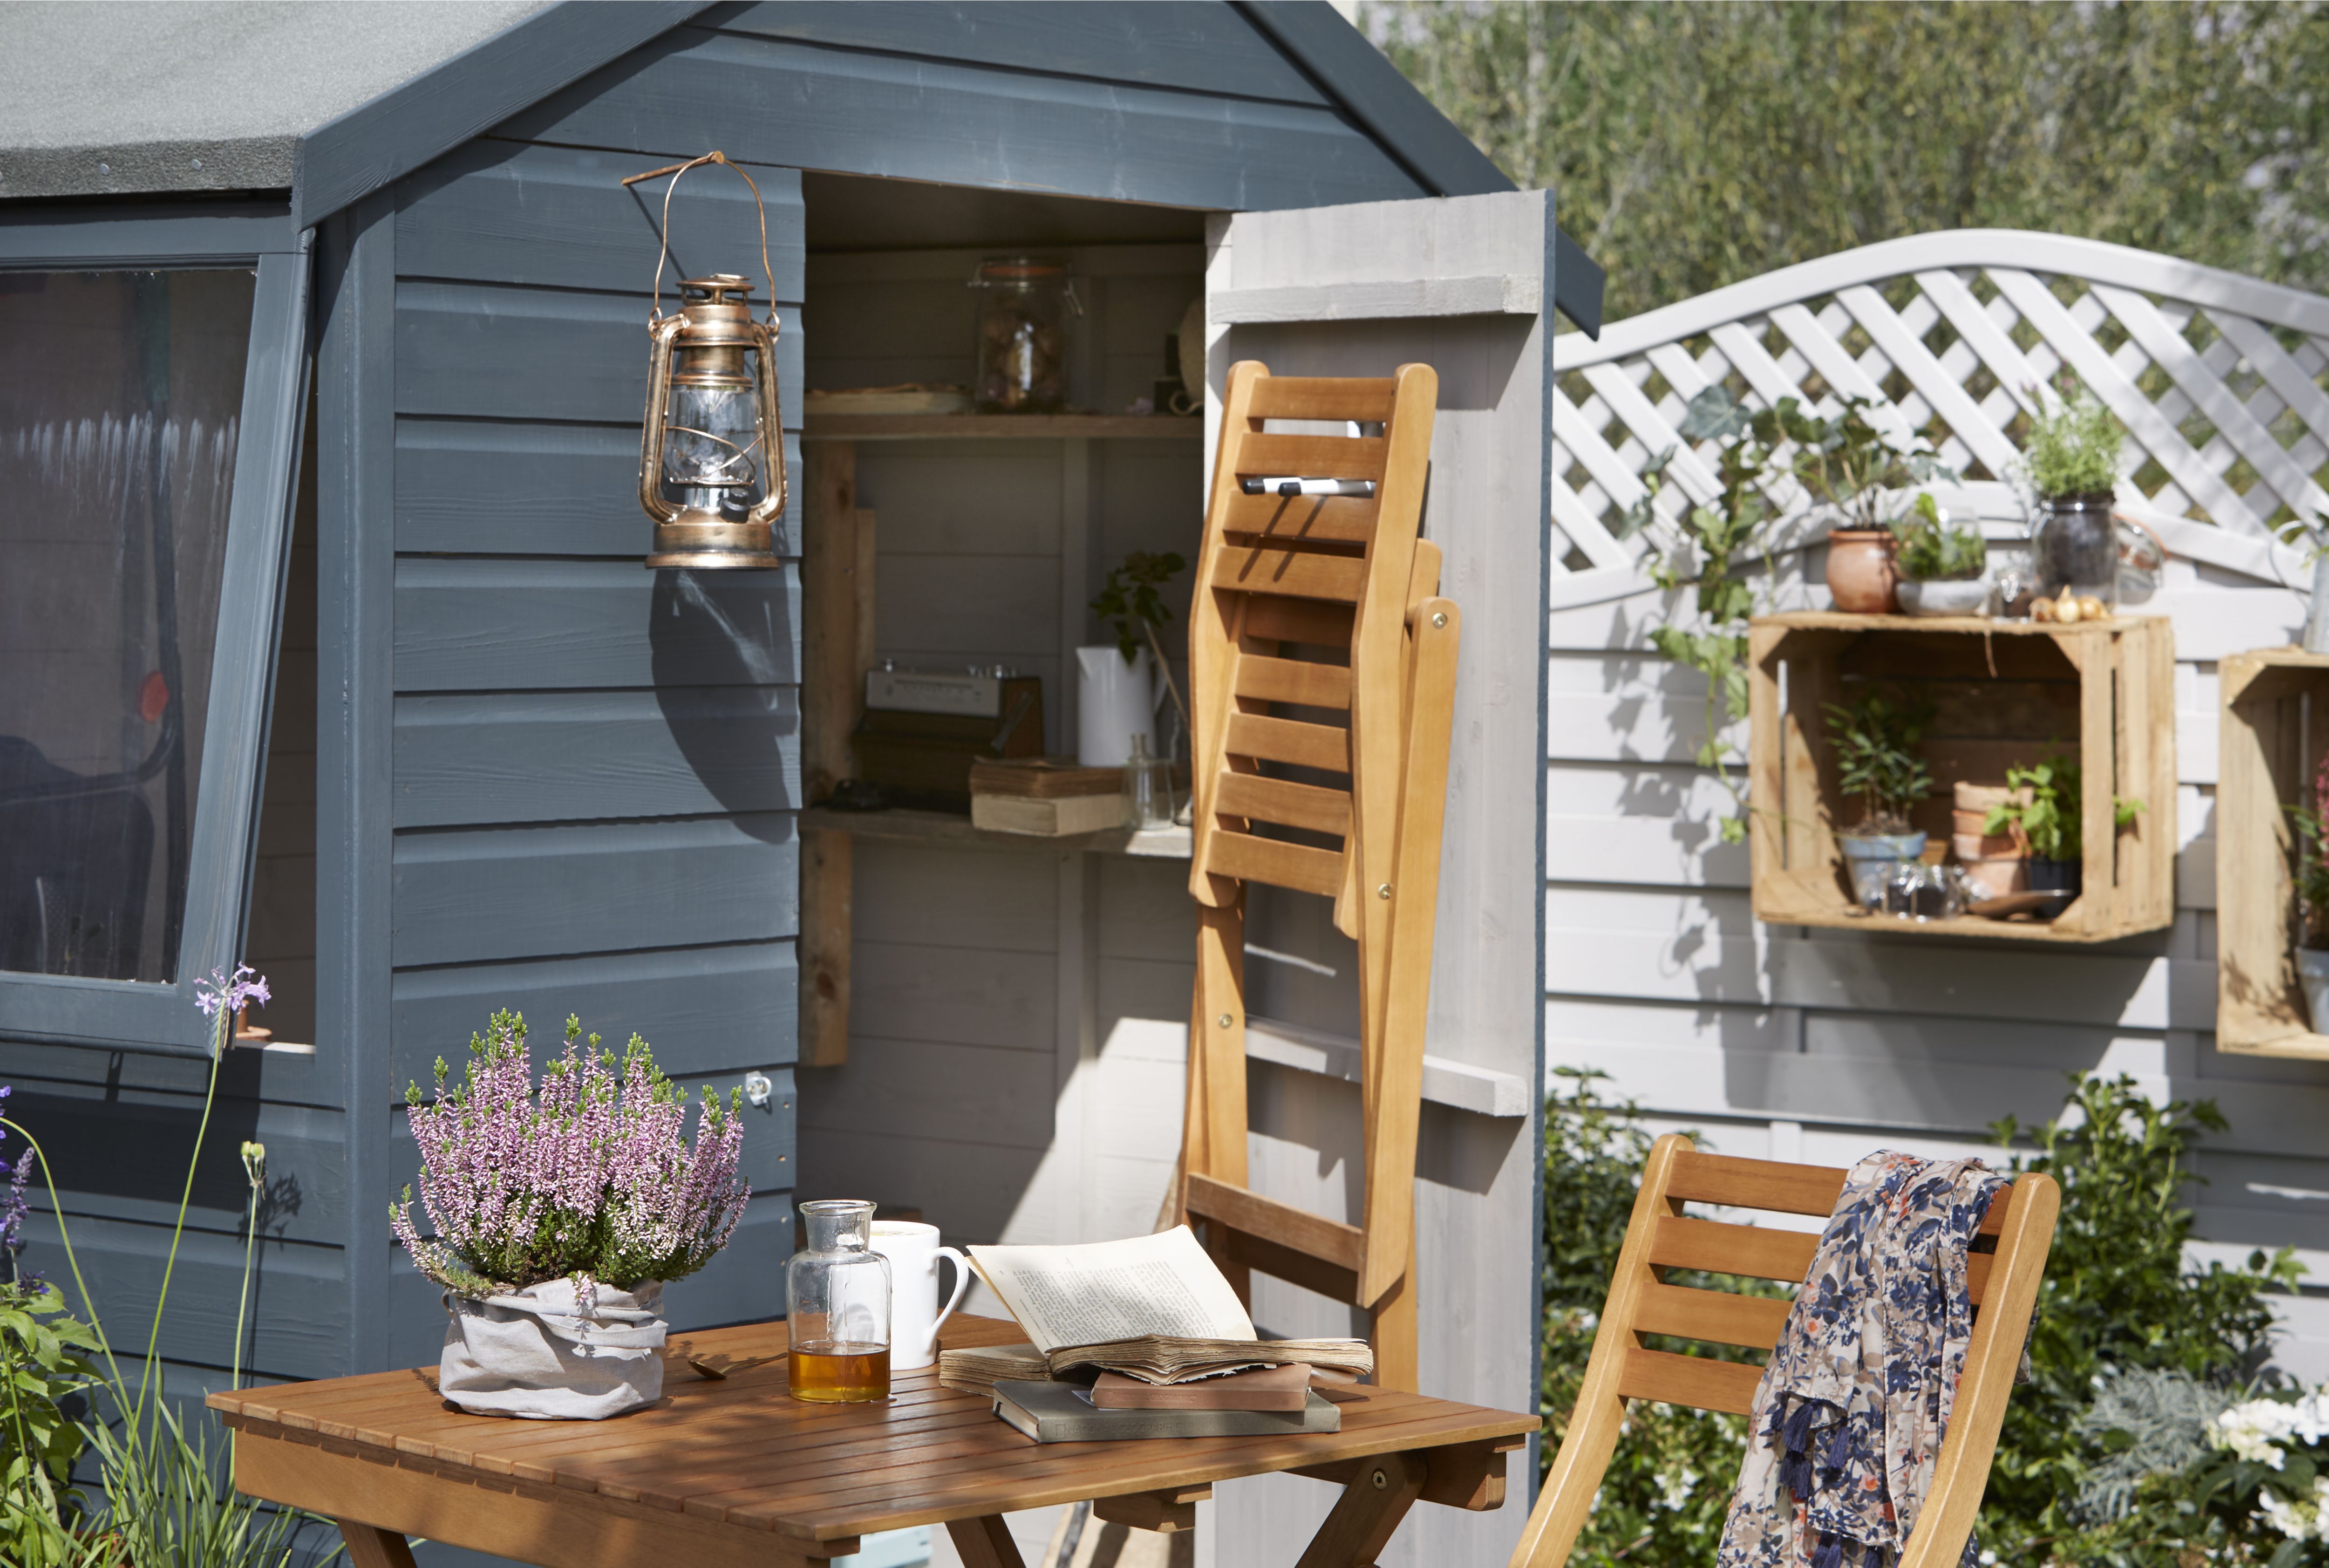 How to paint a wooden shed or fence | Ideas &amp; Advice | DIY 